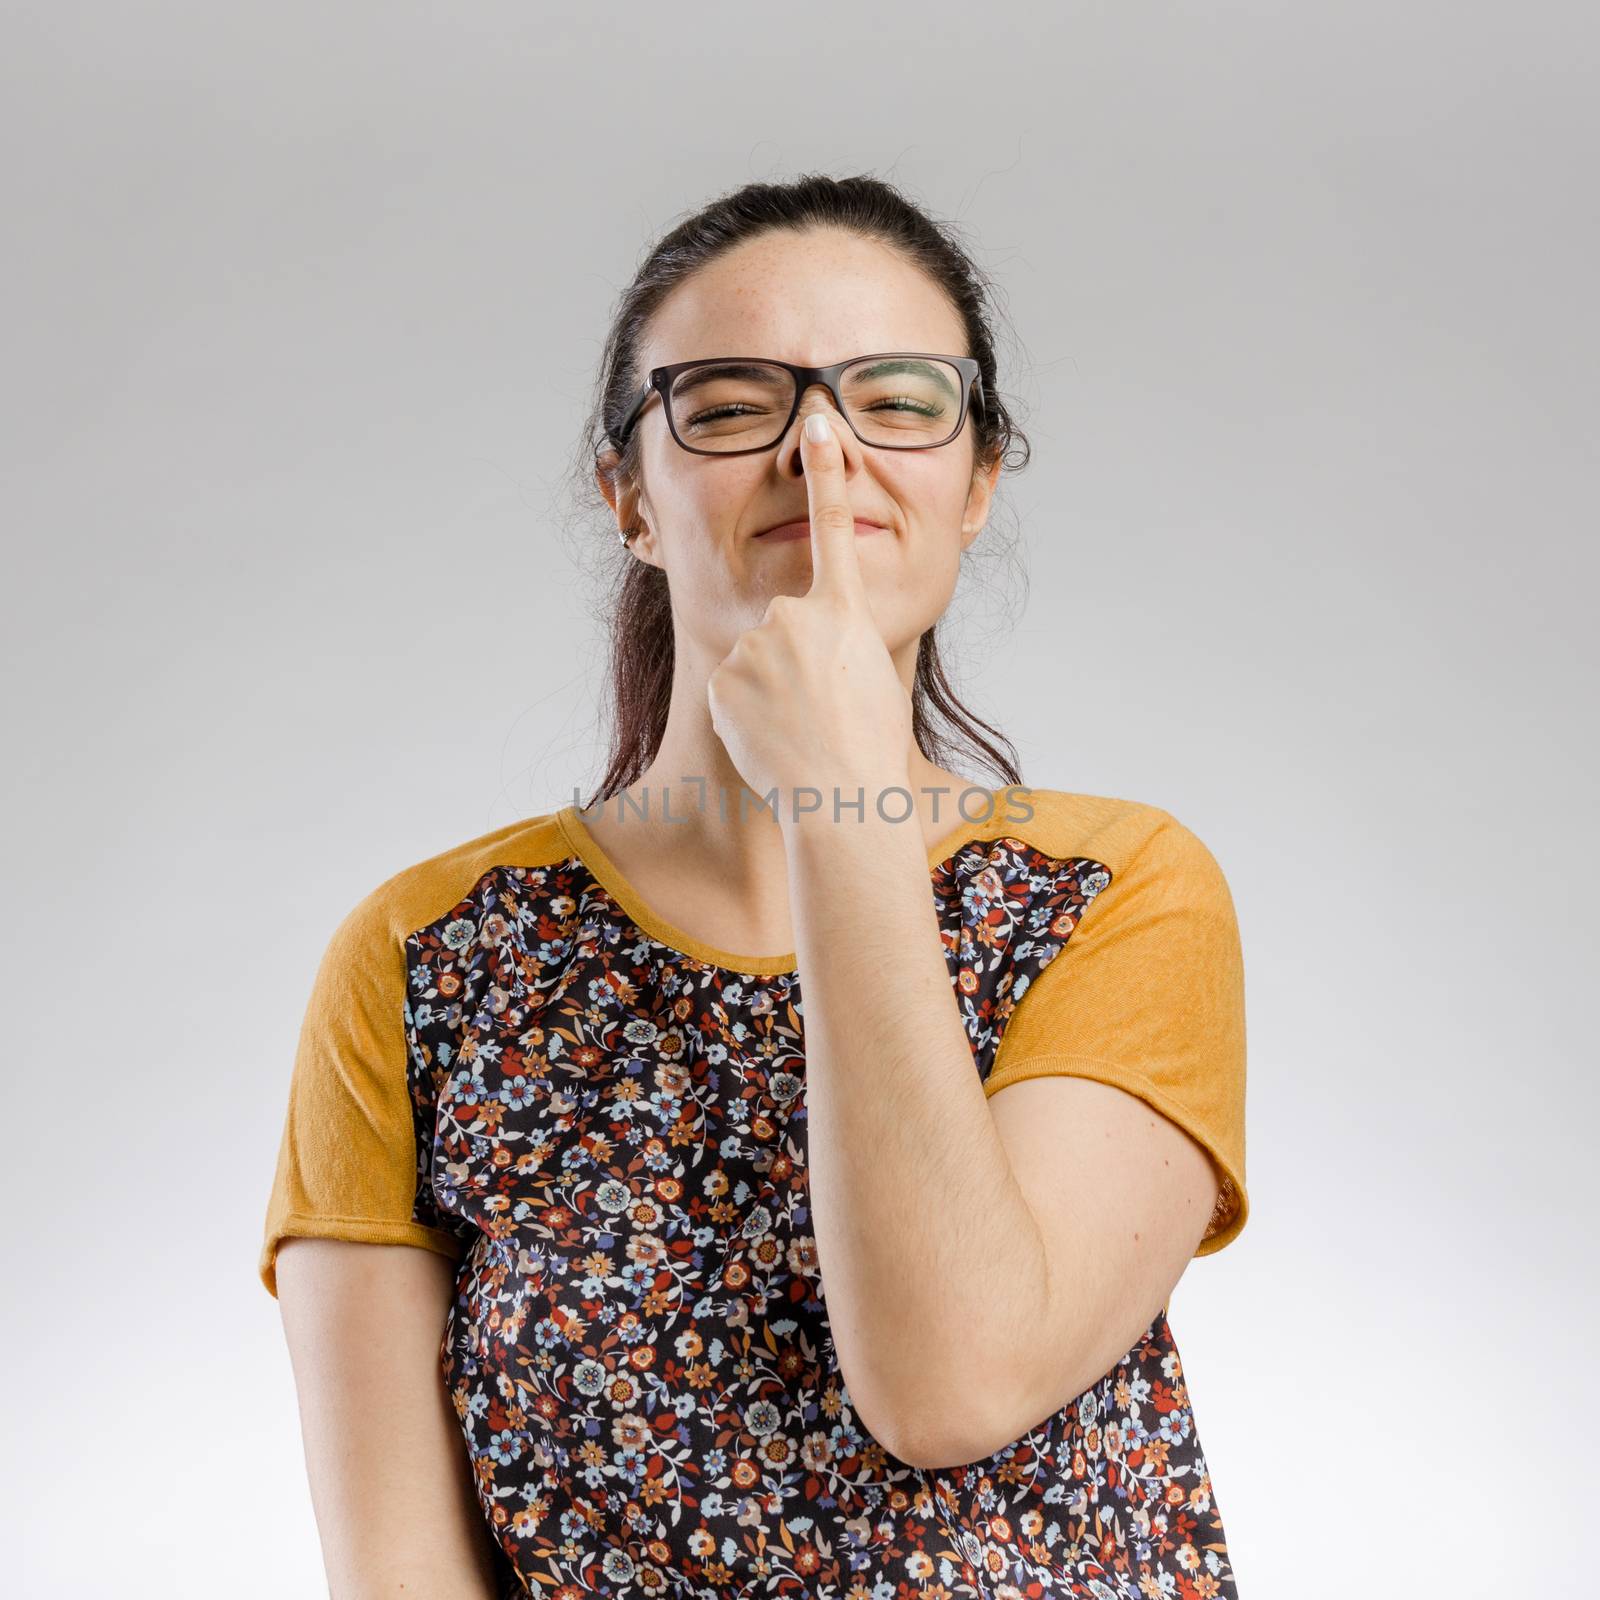 Cute portrait of a woman touching her nose